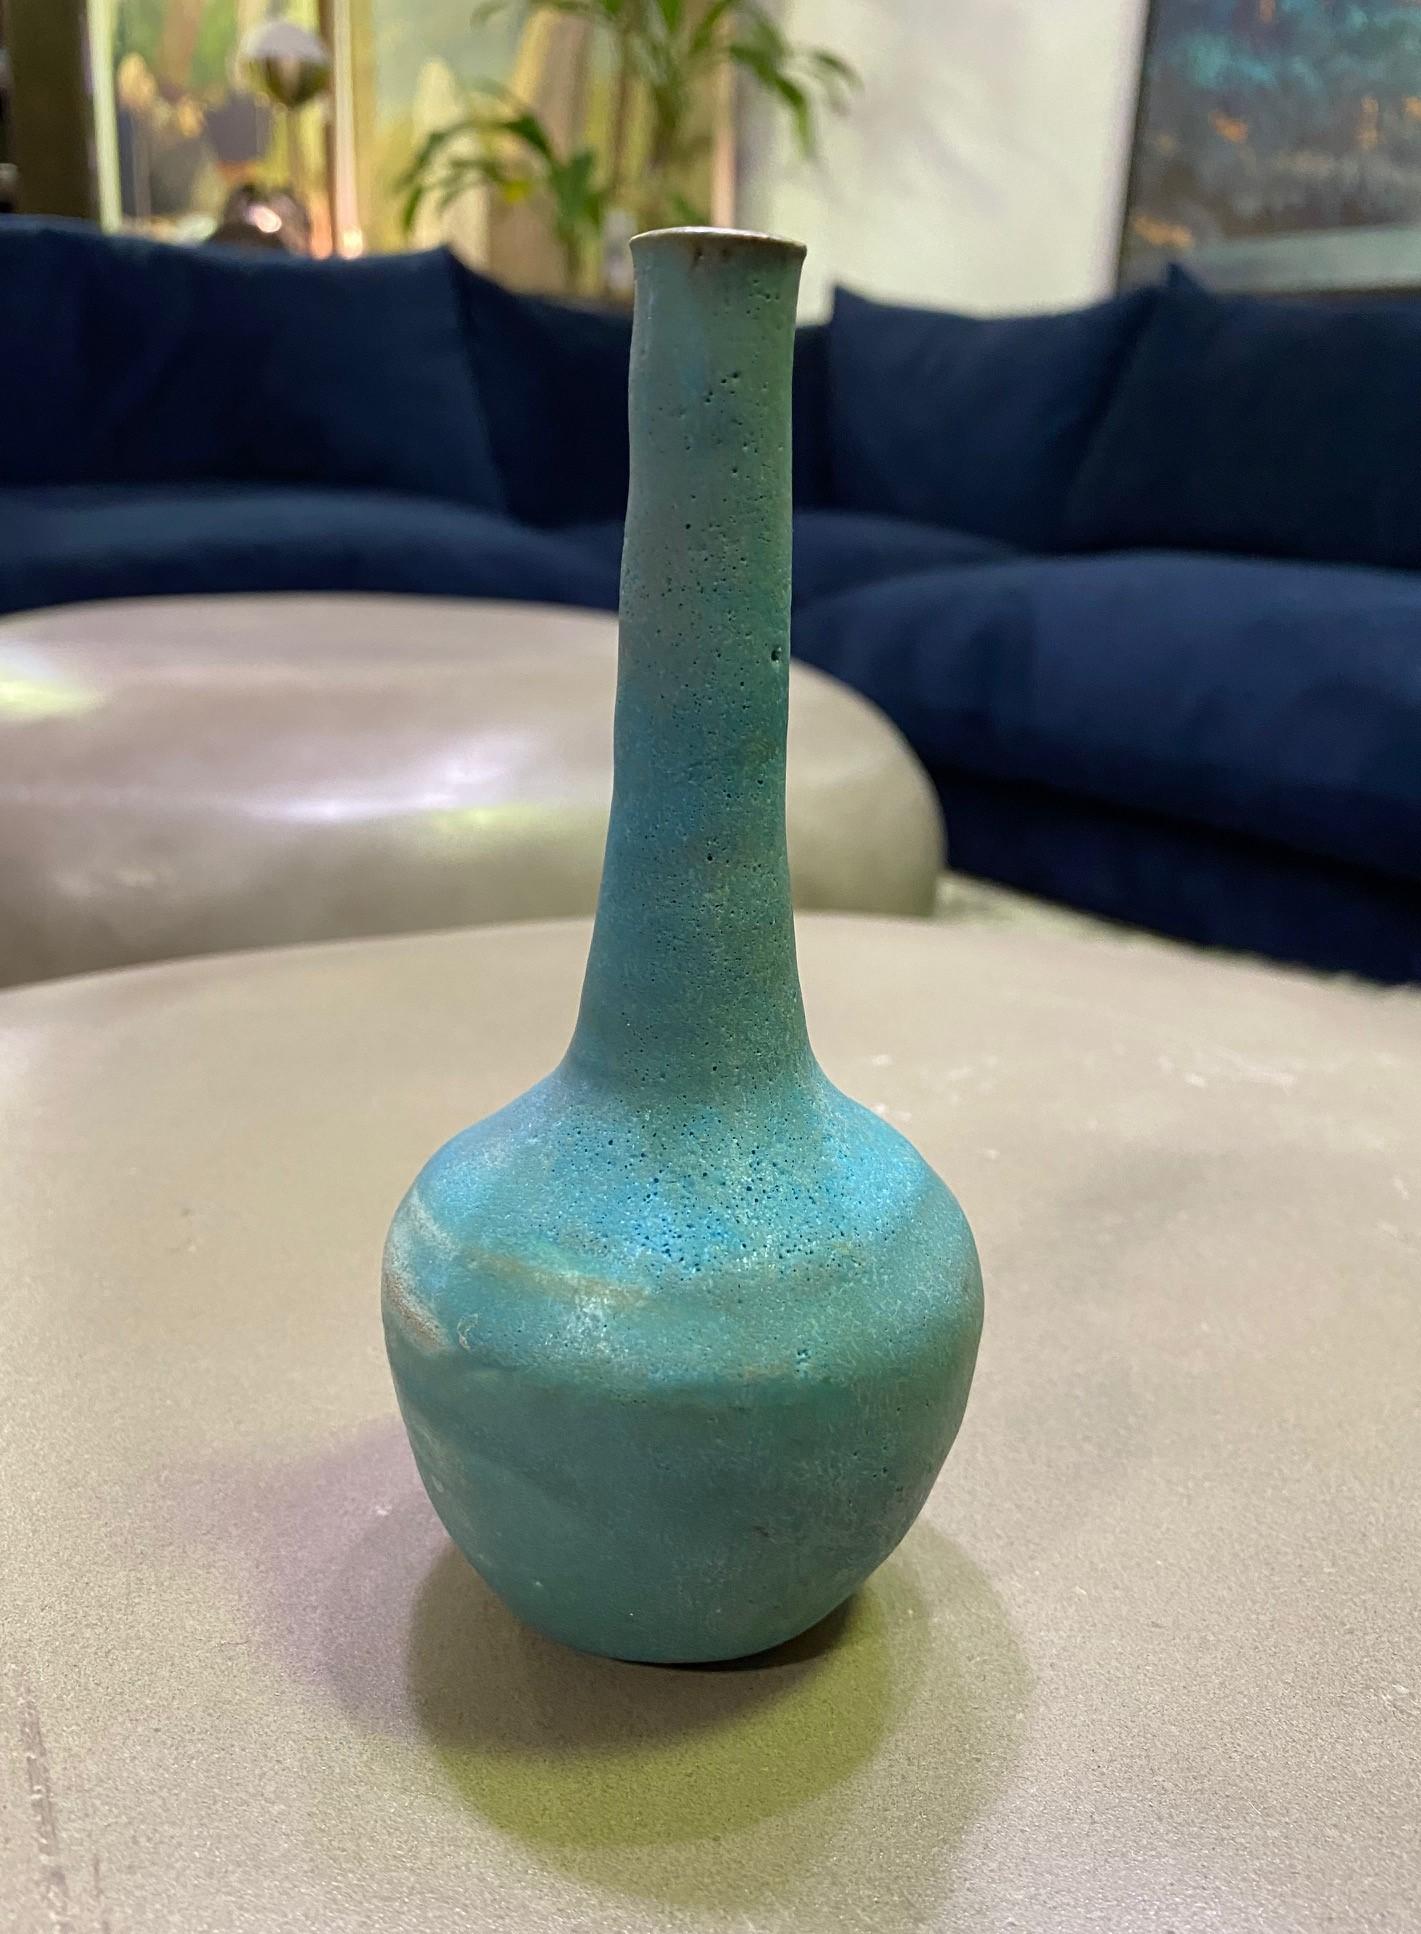 A wonderful gem of a piece by famed American ceramist Beatrice Wood featuring a gorgeous turquoise lava glaze. A wonderful design with a delicate long neck rising from a circular base. Classic and timeless. 

Signed by Beatrice in her customary